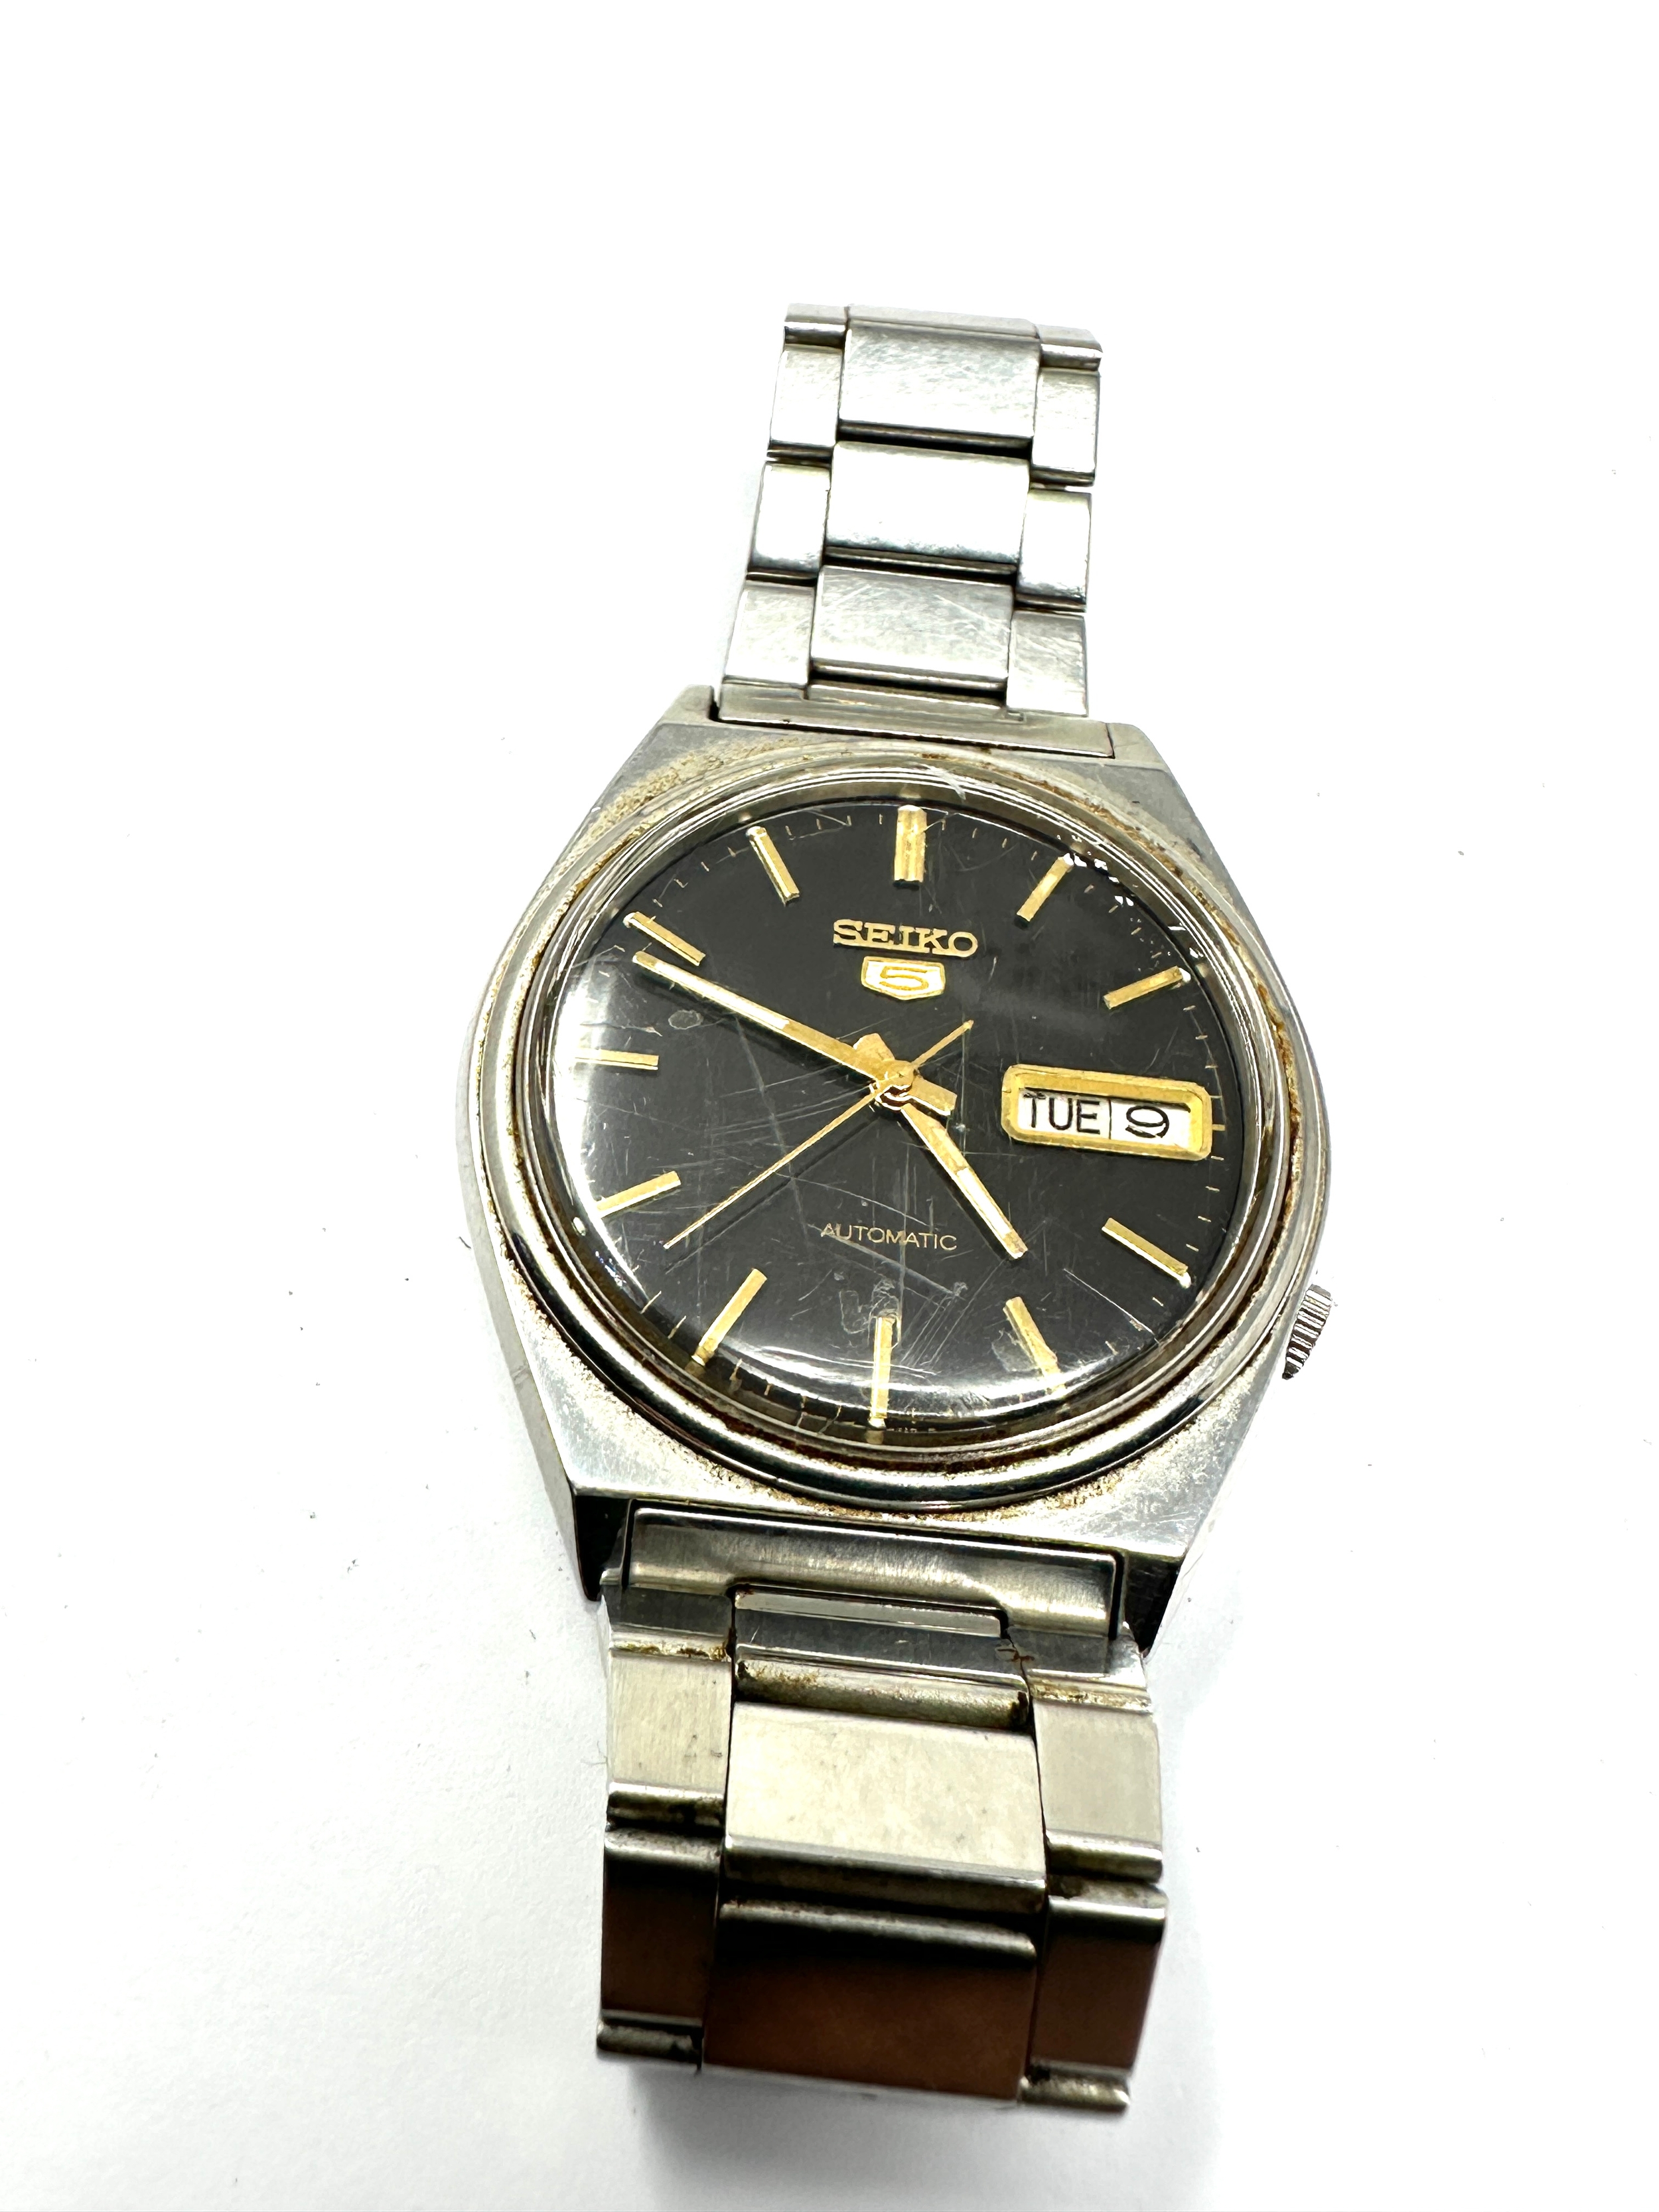 Vintage Seiko 5 Automatic Day & Date 7009 -3140 the watch is ticking black dial